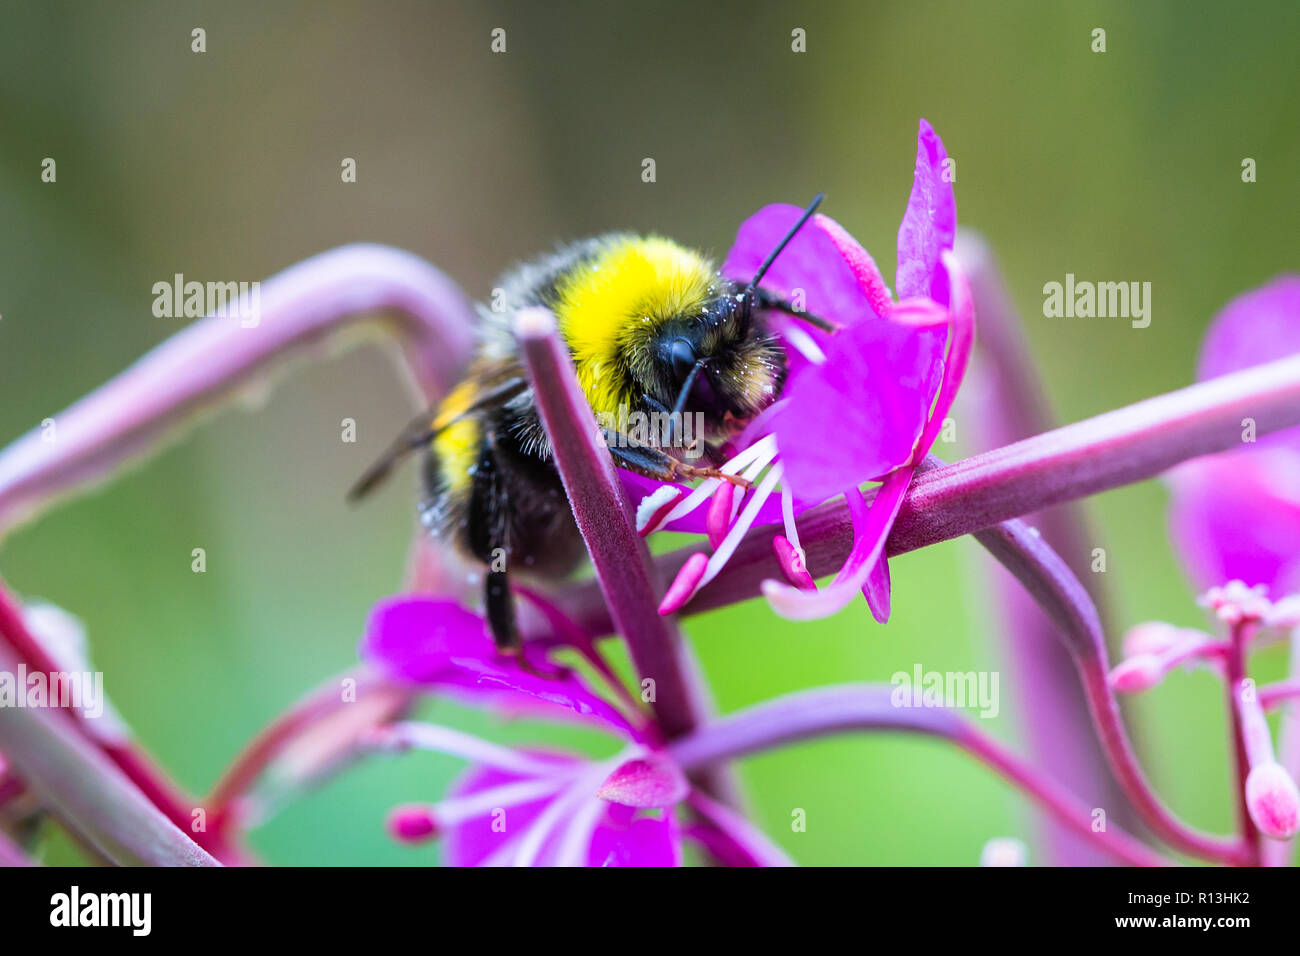 Bumble bee on flower. Stock Photo